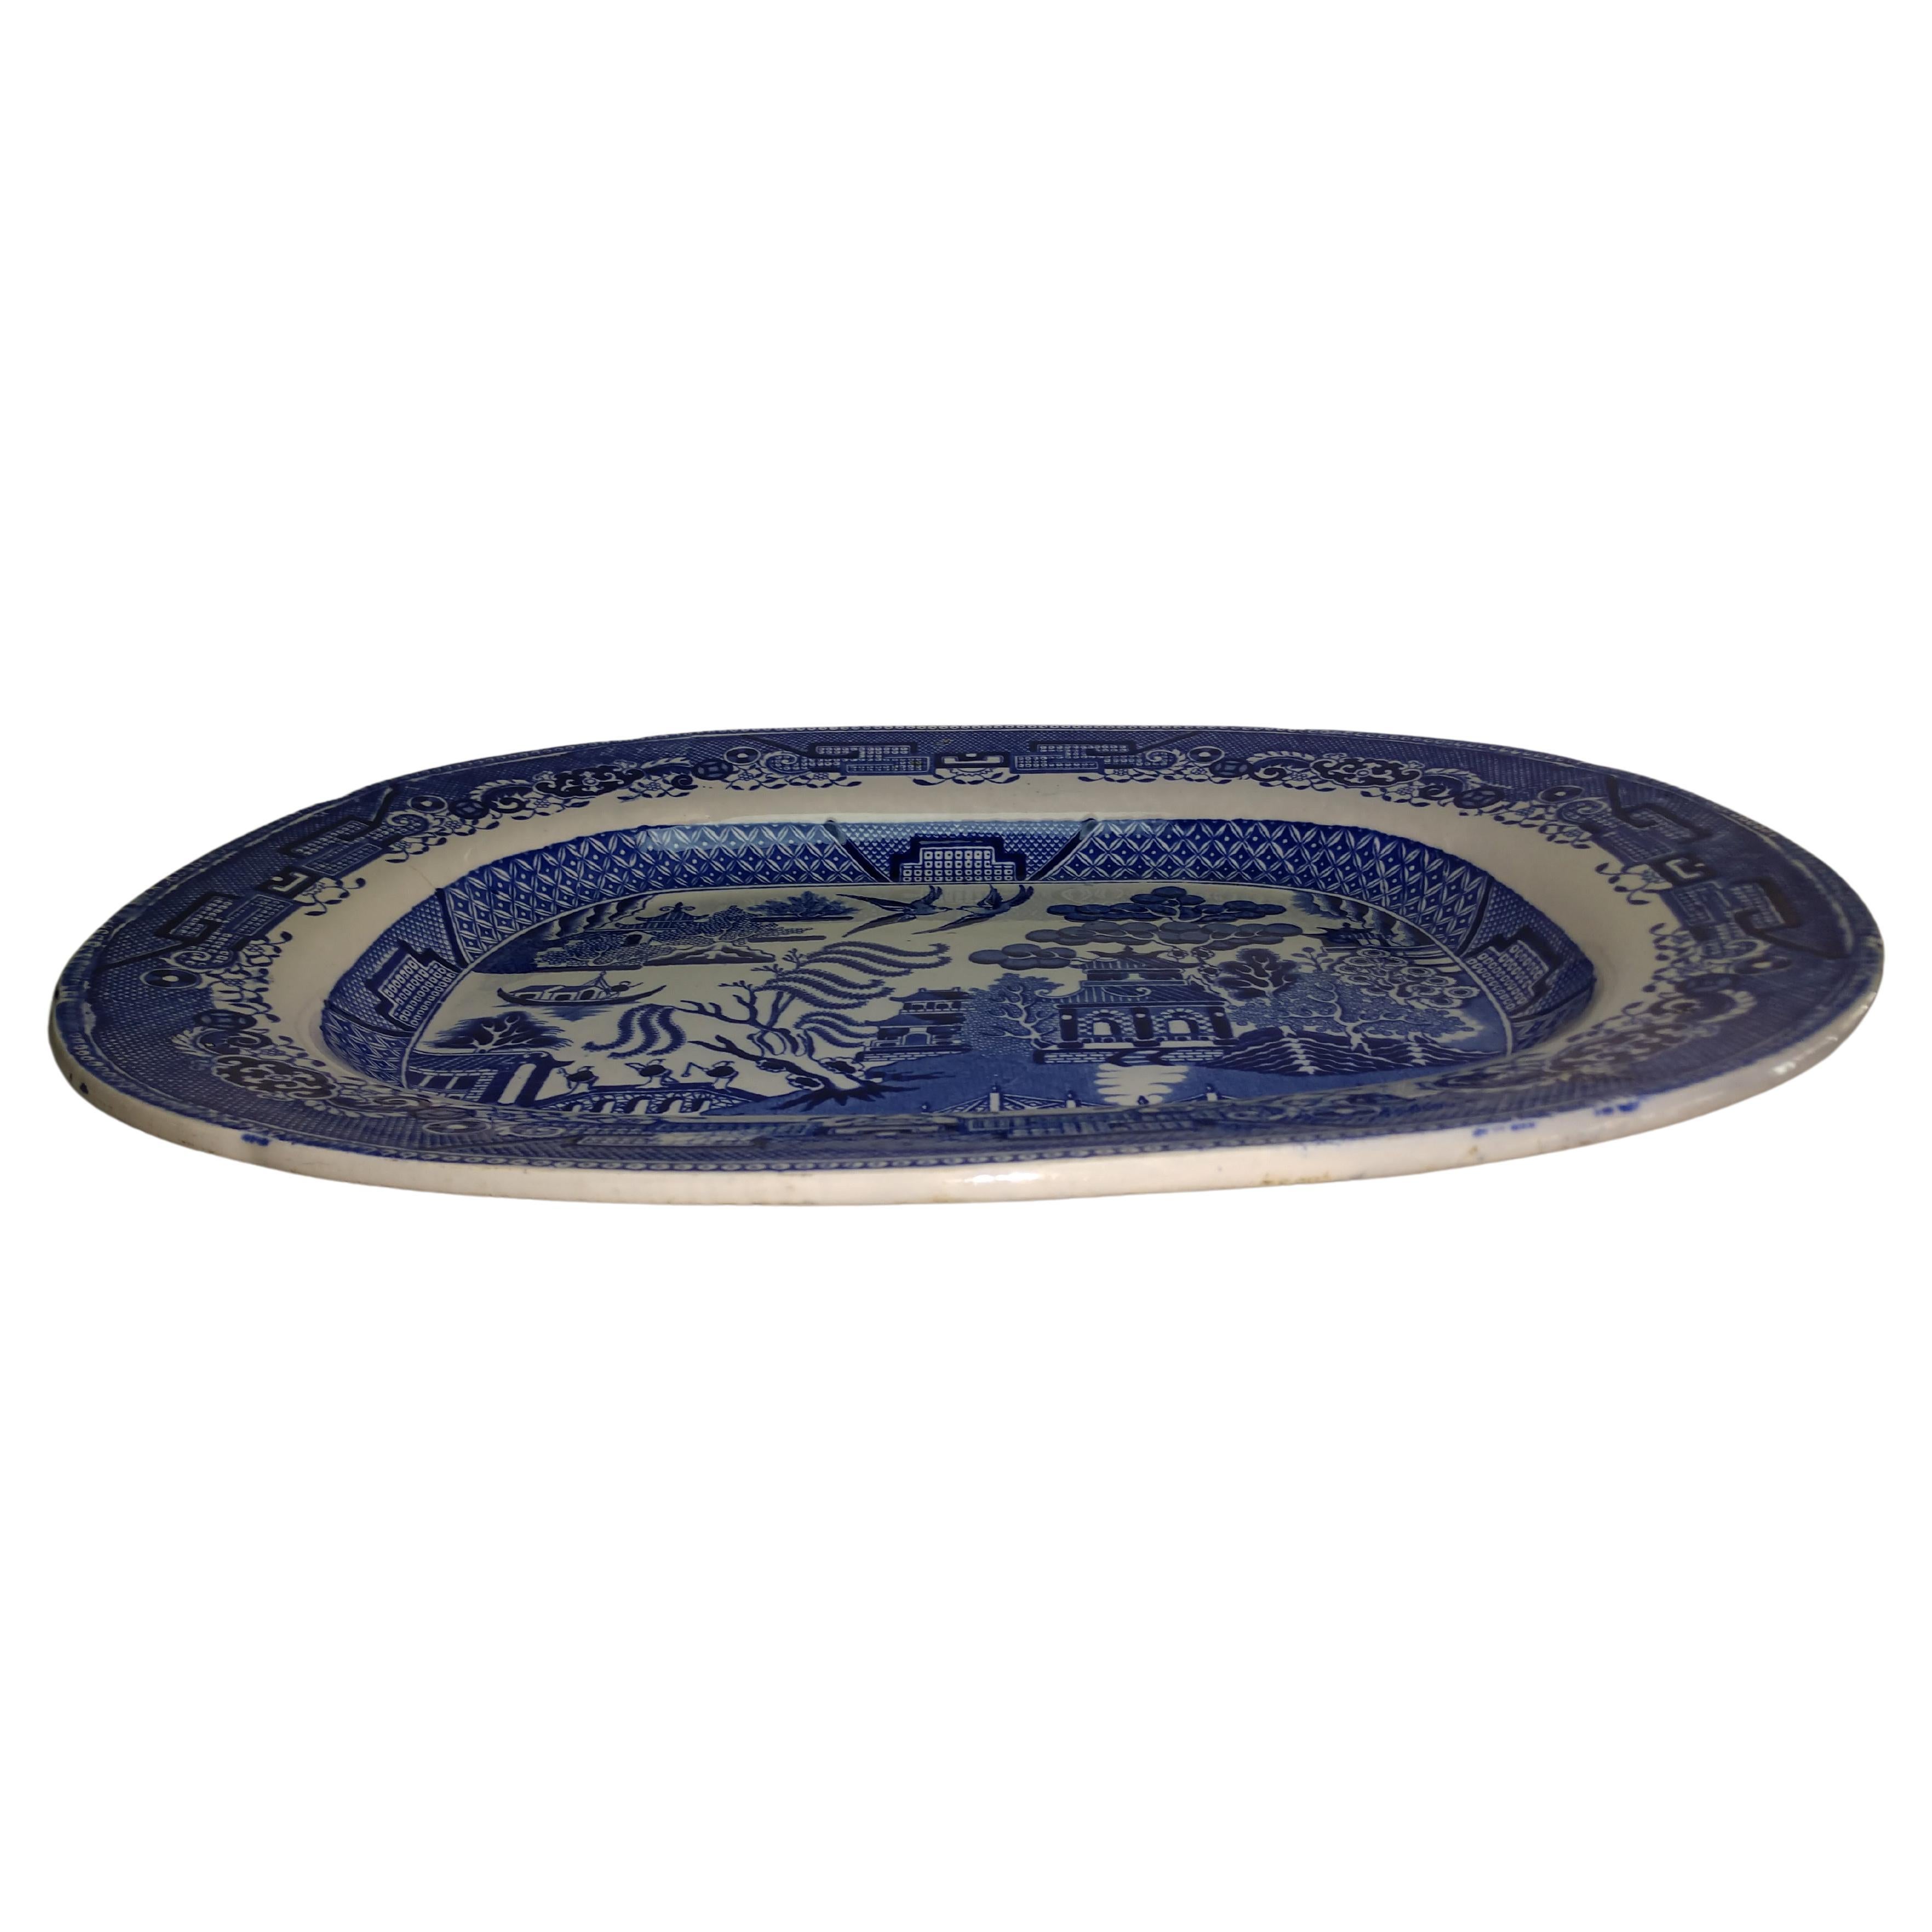 Fabulous deep and large blue willow platter from England. Late 19th century in excellent condition with no damage, chips or cracks. Excellent color retention. The best serving platter in blue willow that you will find.